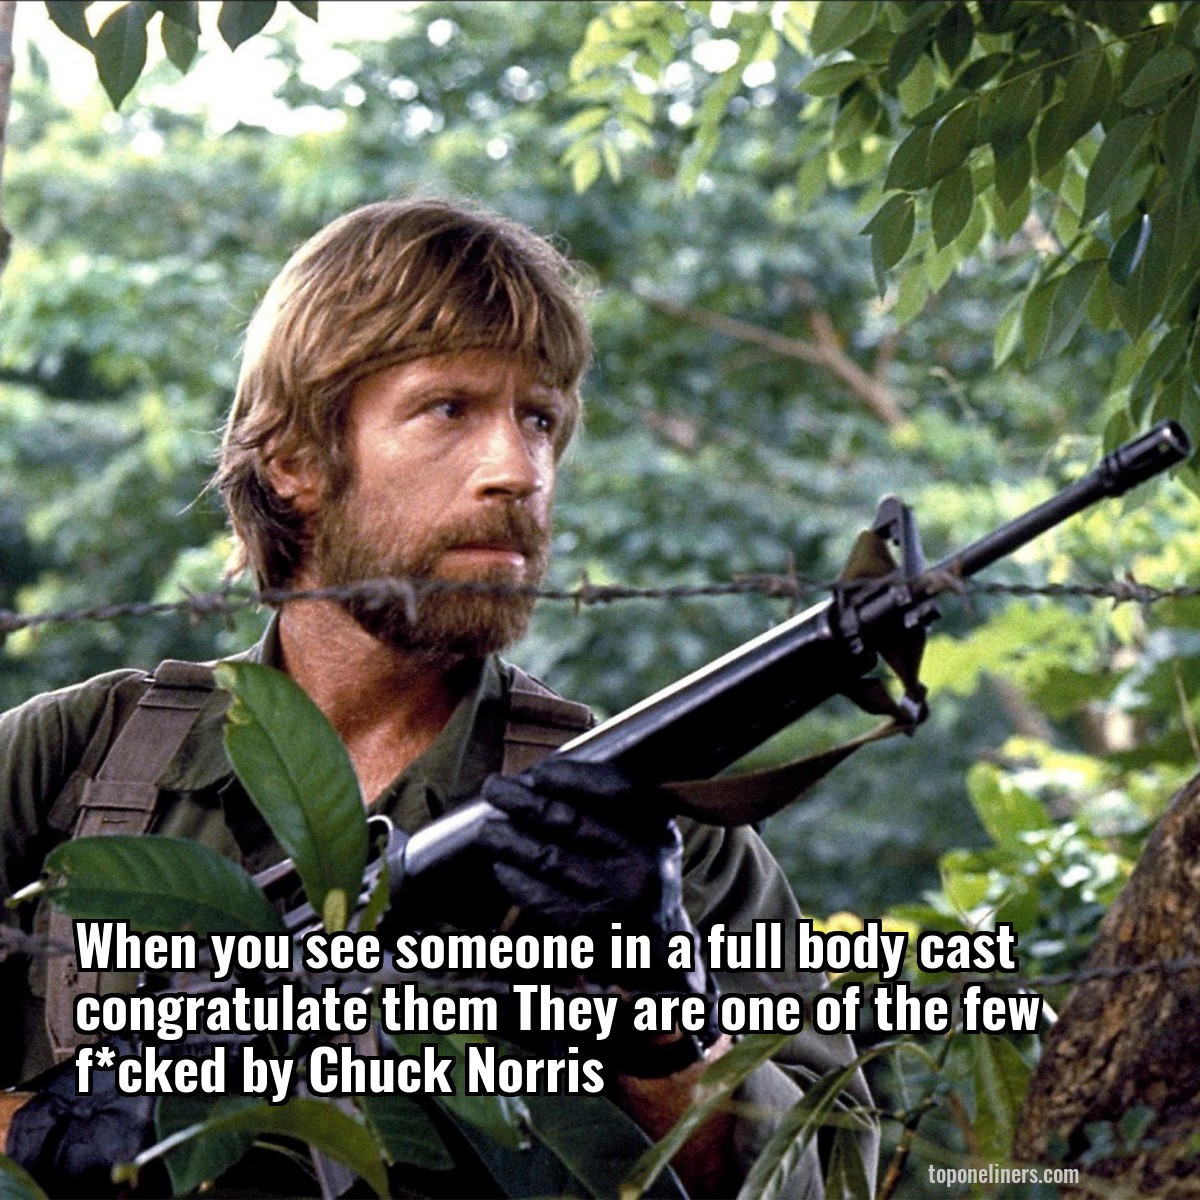 When you see someone in a full body cast congratulate them They are one of the few f*cked by Chuck Norris